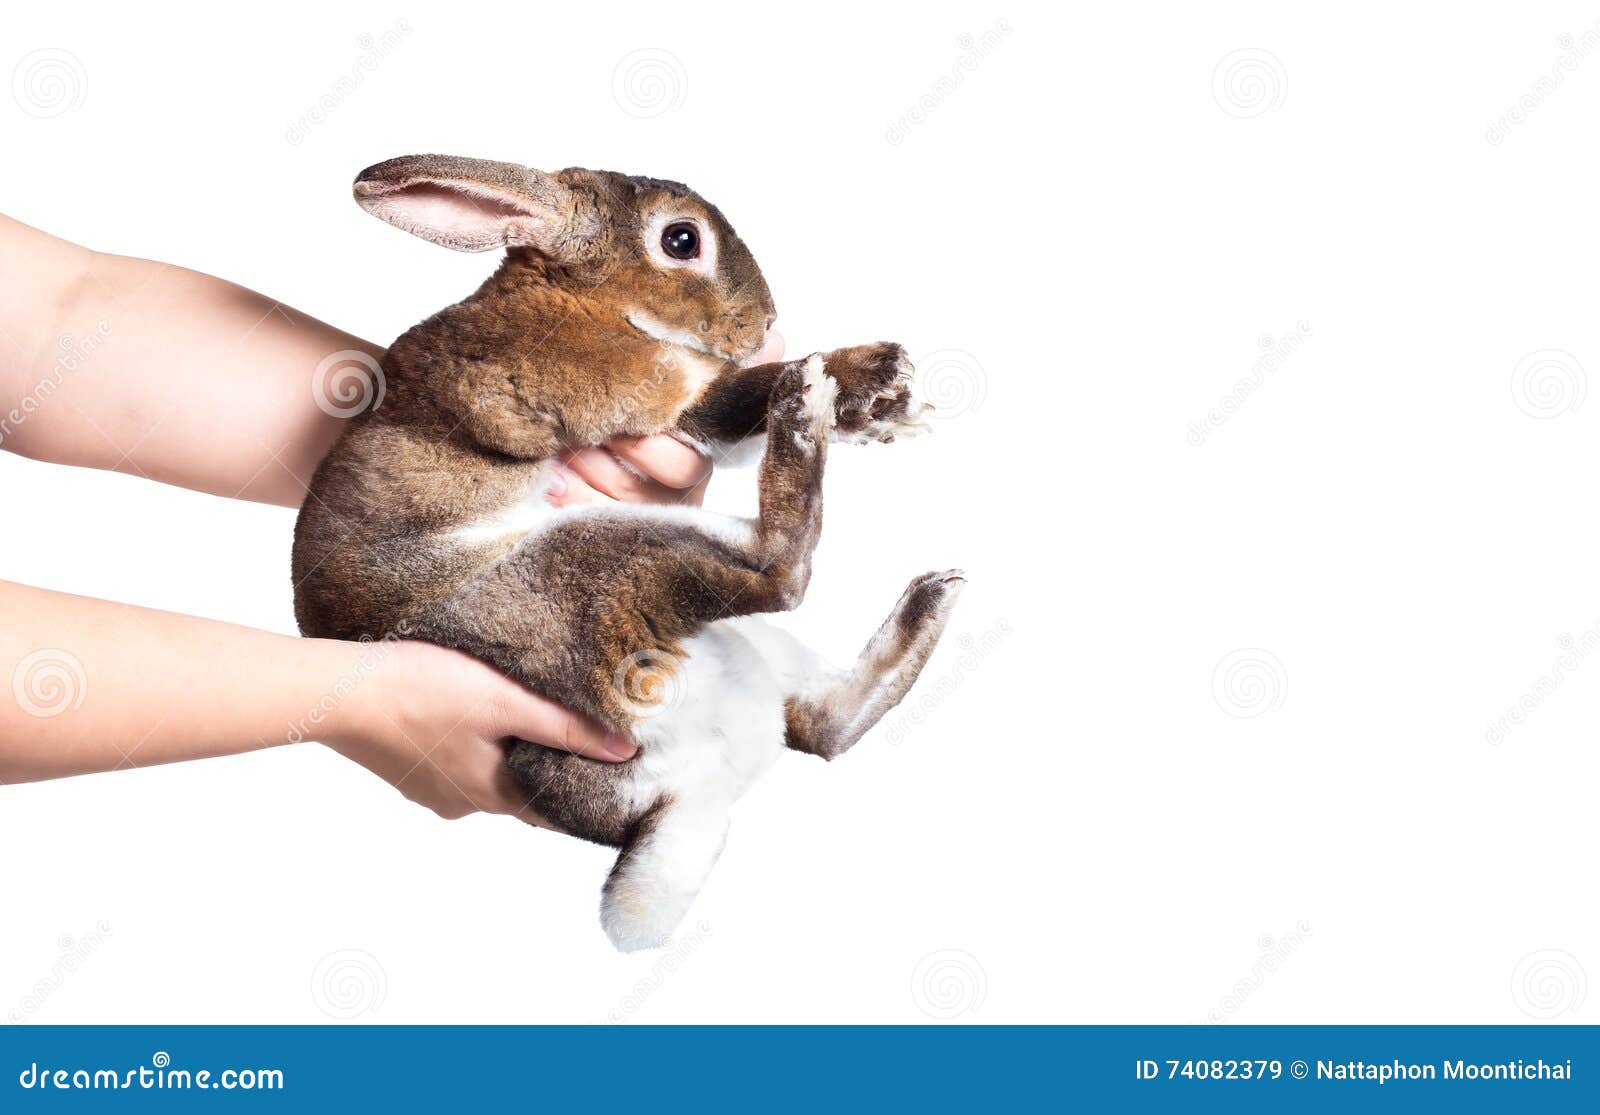 Rabbit In Hand Stock Image Of Fluffy, Hare, Ears 47868494